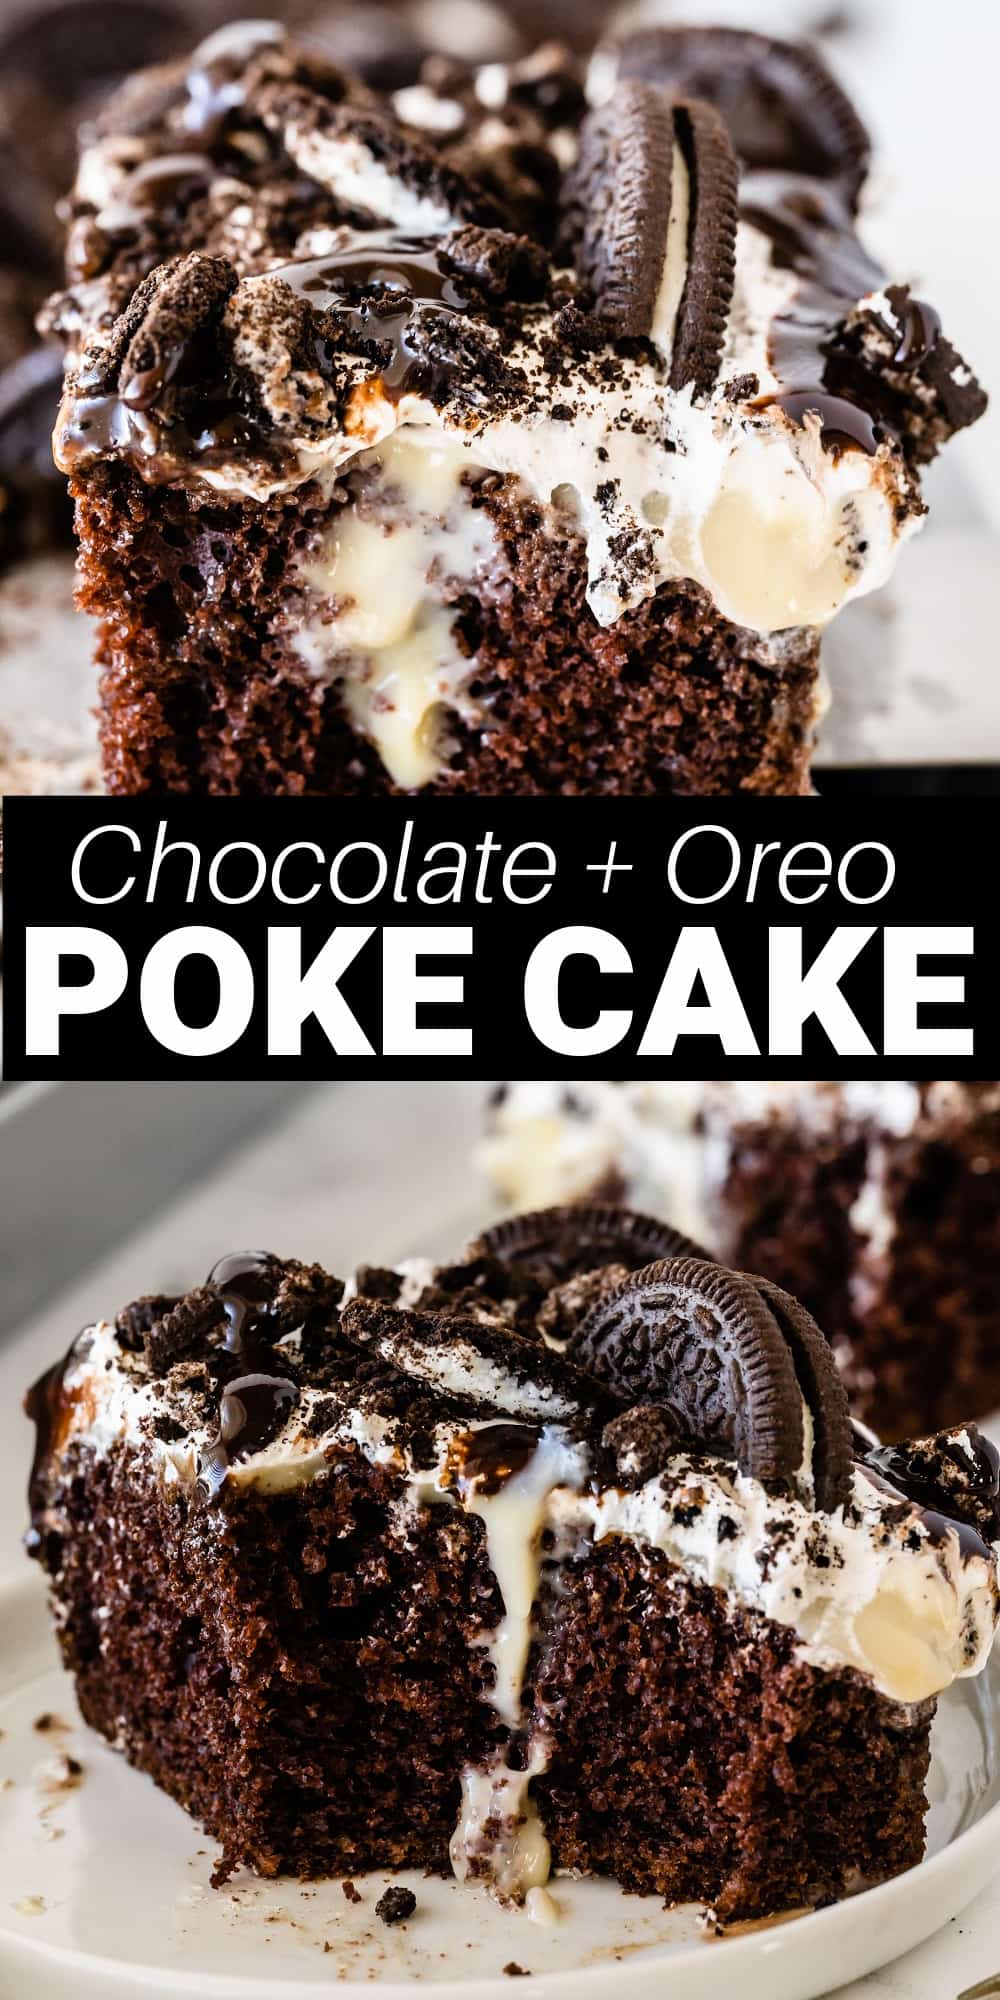 This Oreo poke cake is an easy and delicious moist chocolate cake that's loaded with cream pudding and topped with a whipped topping, Oreos and chocolate cause. It's an Oreo-lovers dream and is perfect for a birthday party, holiday, or a get together with family and friends.